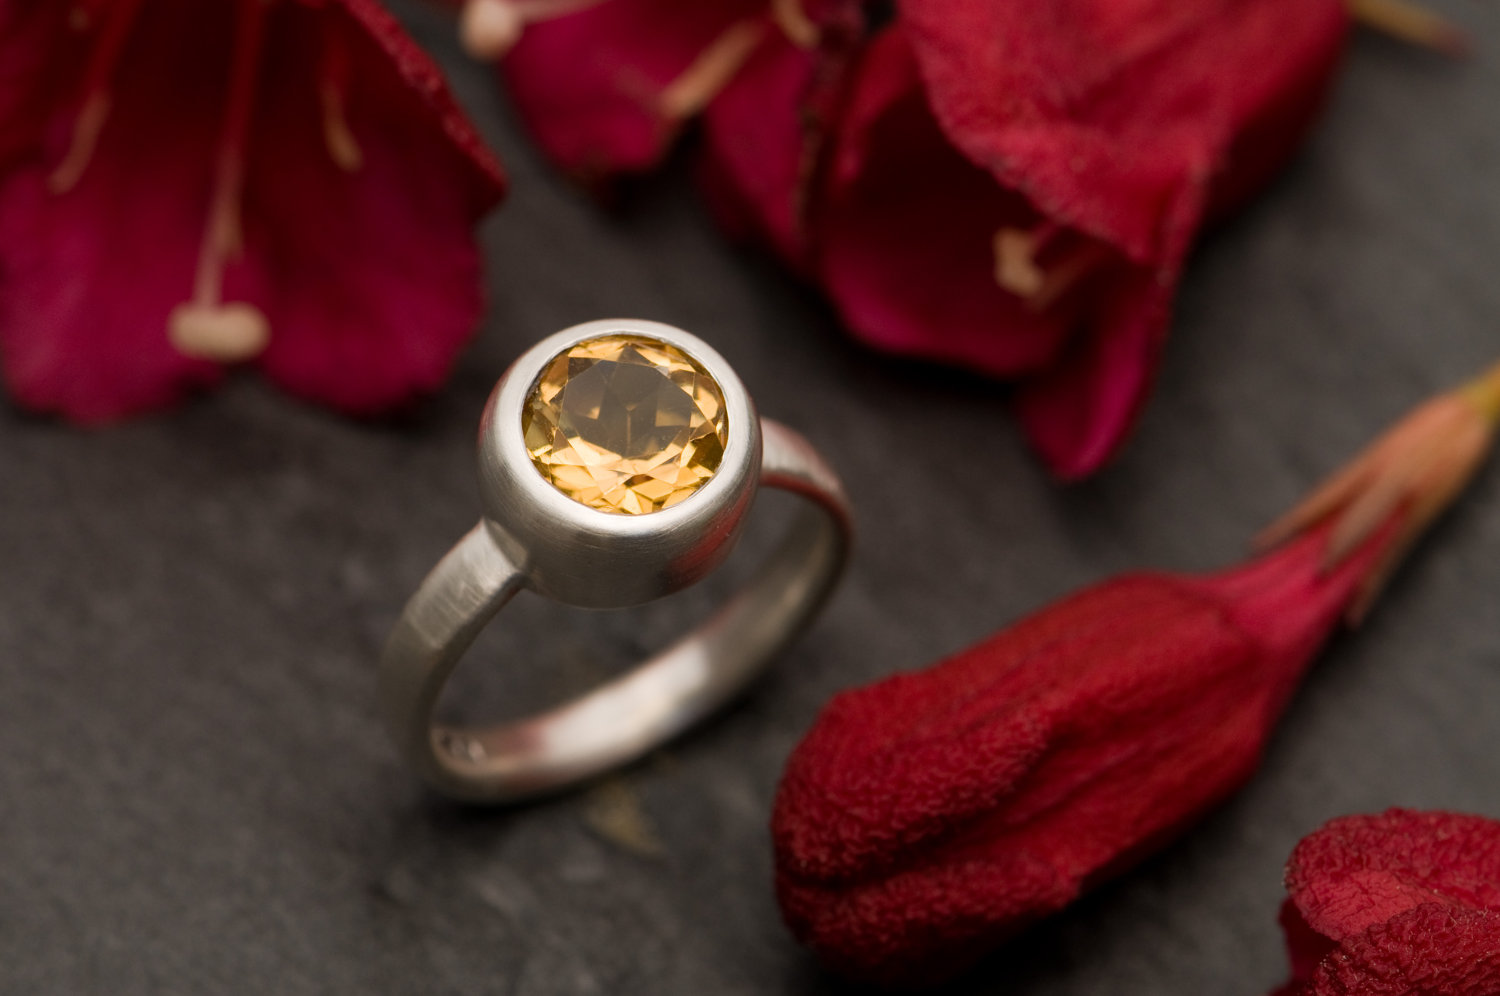 citrine solitaire set in silver ring by William White